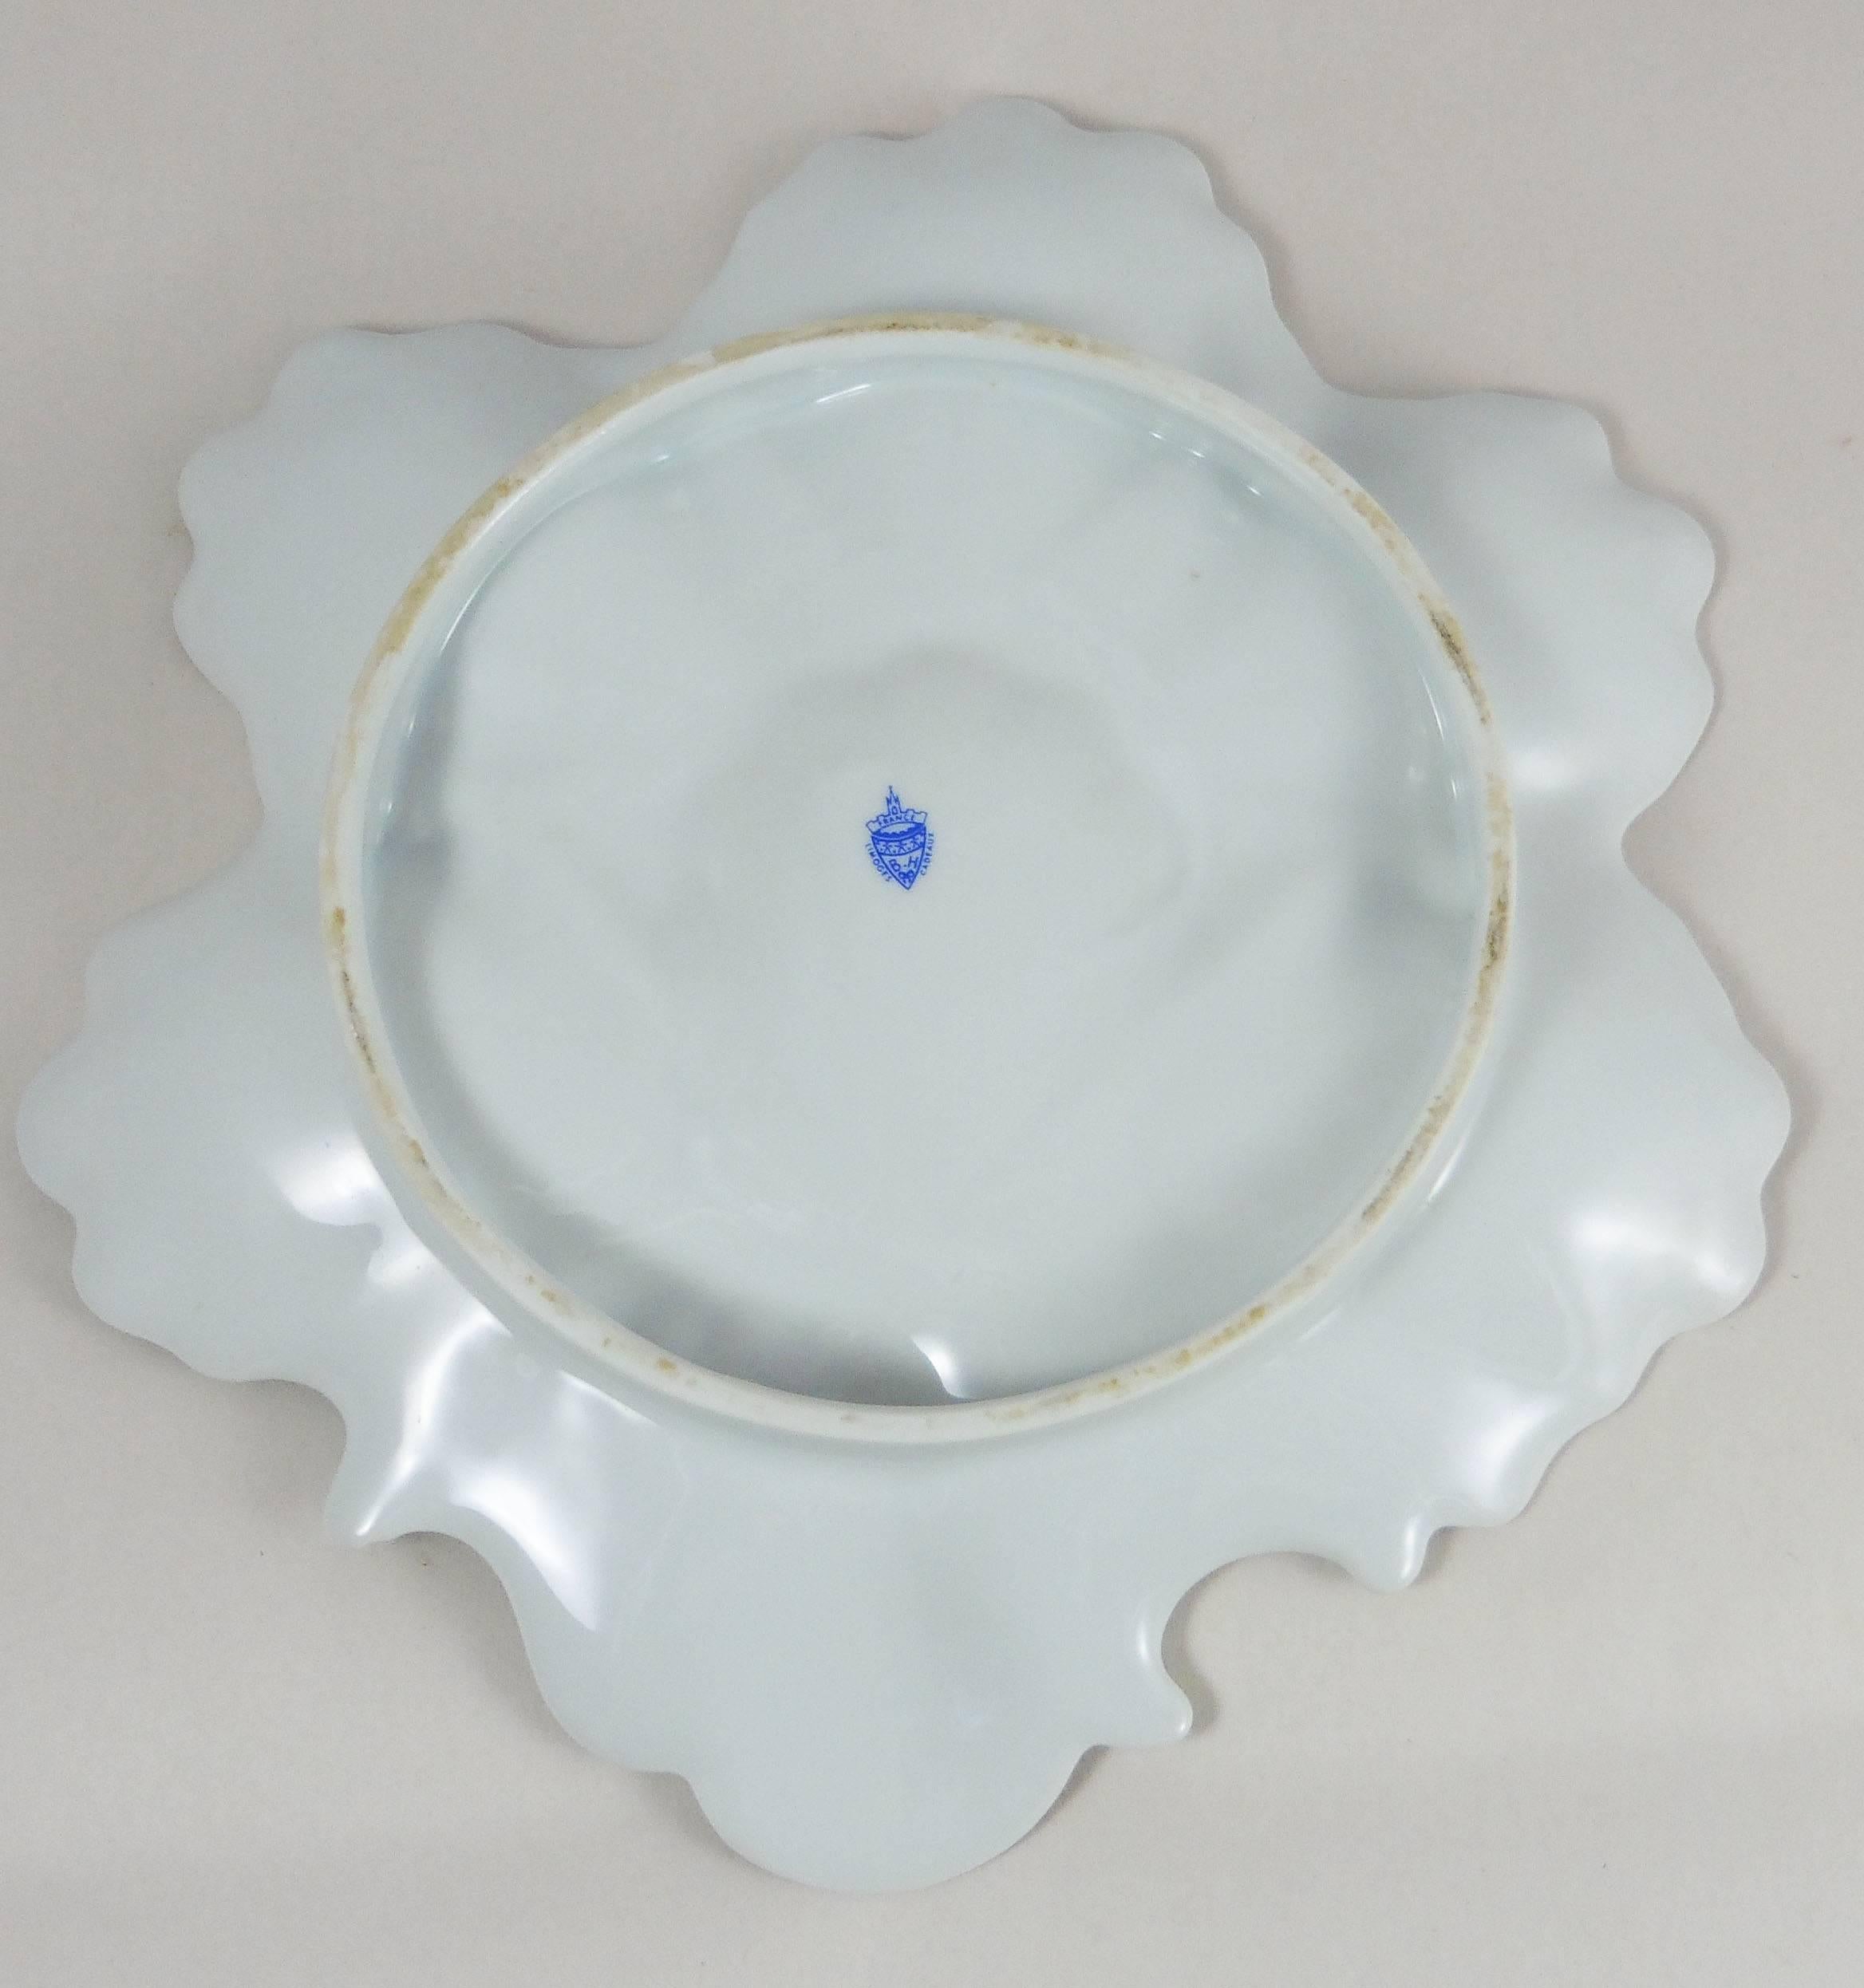 Aesthetic Movement Porcelain Oyster Plate with Seaweeds Limoges, circa 1900